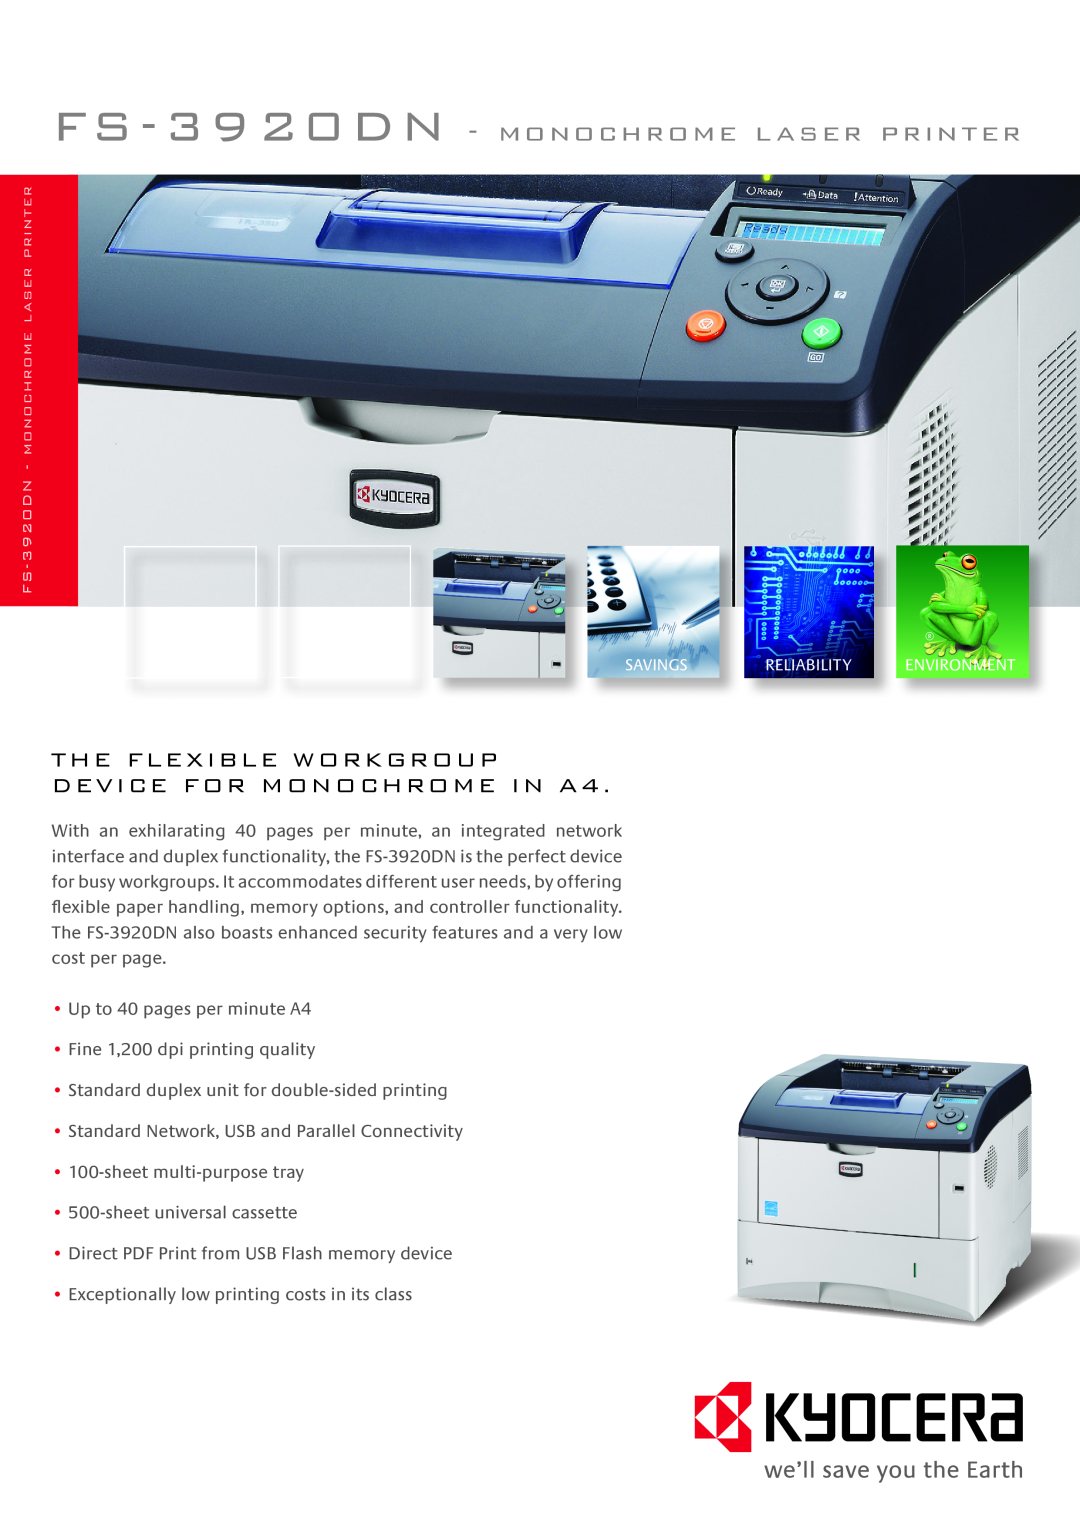 Kyocera manual FS-3920DN - MONOCHROME LASER PRINTER, The Flexible Workgroup, DEVICE FOR MONOCHROME IN A4 